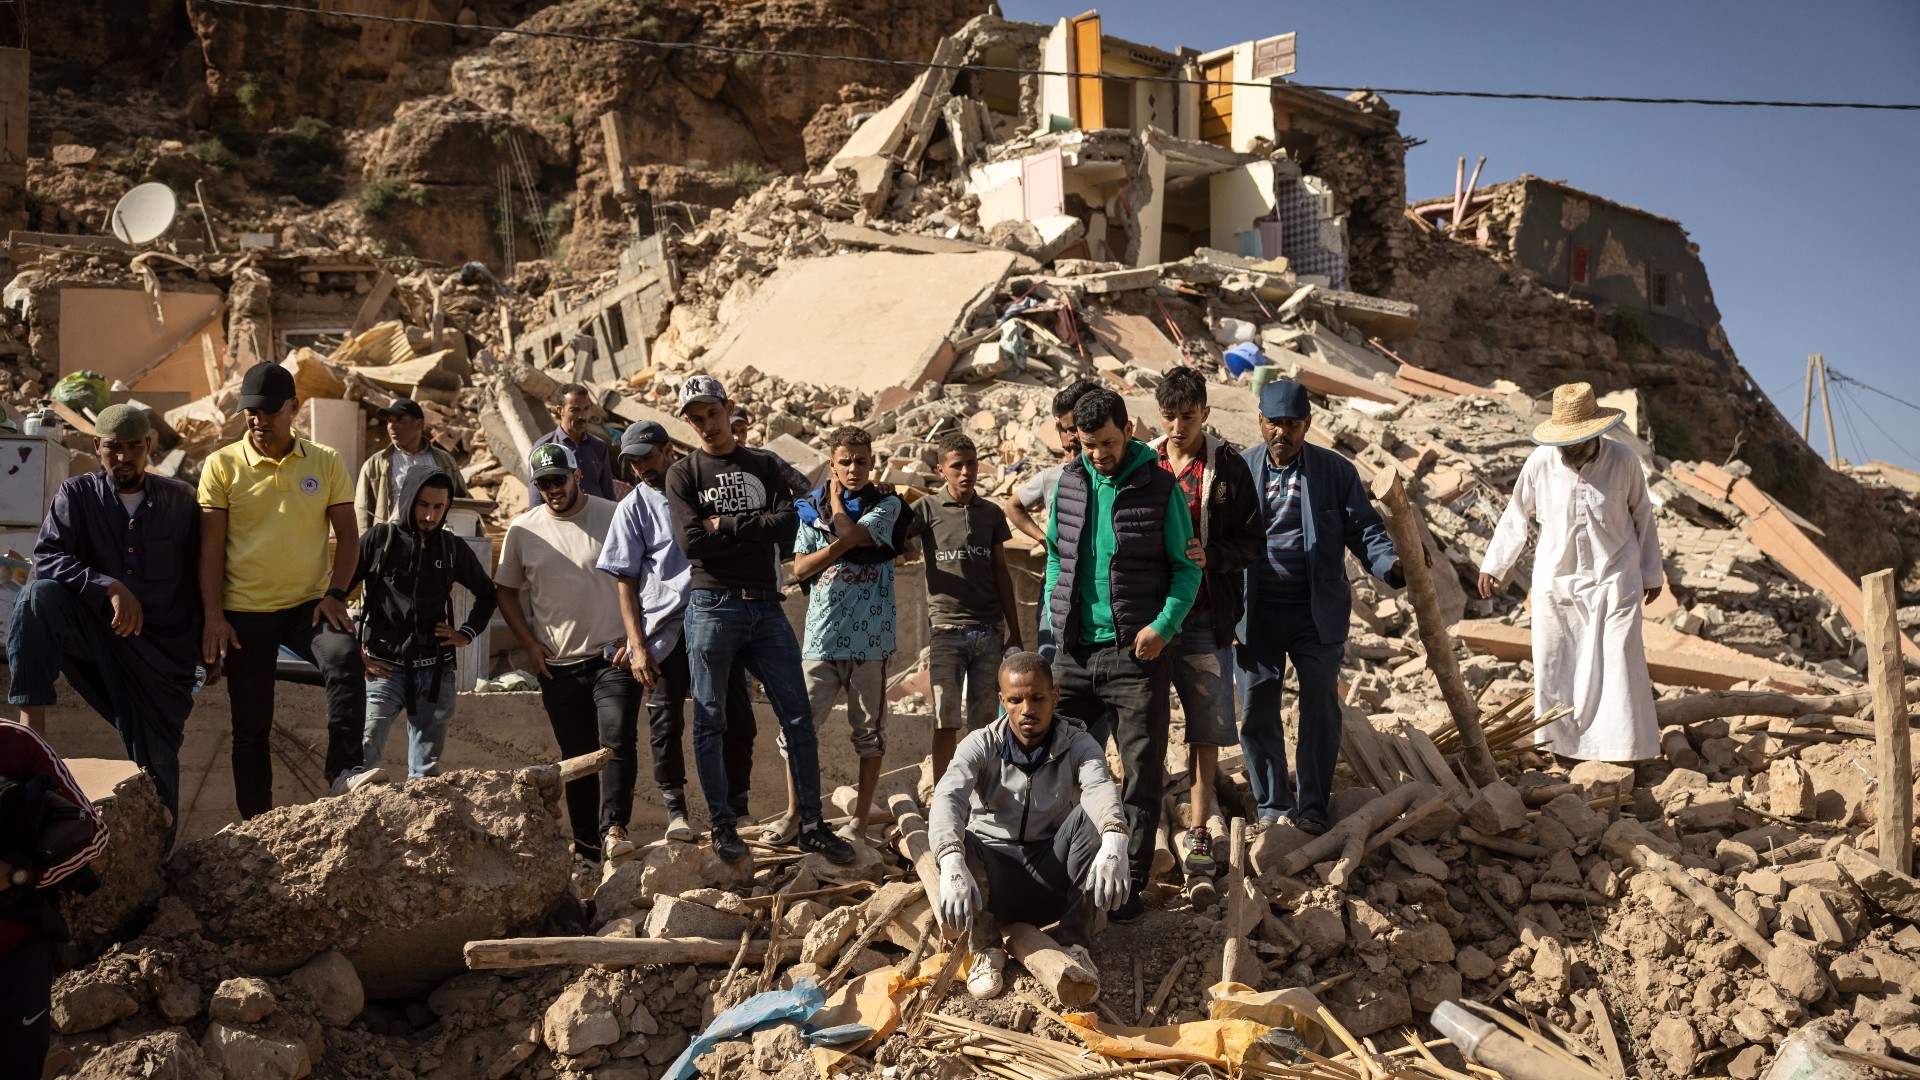 People stand in rubble of collapsed houses in village of Imi N'Tala near Amizmiz in central Morocco after deadly 6.8-magnitude earthquake, on 8 September.